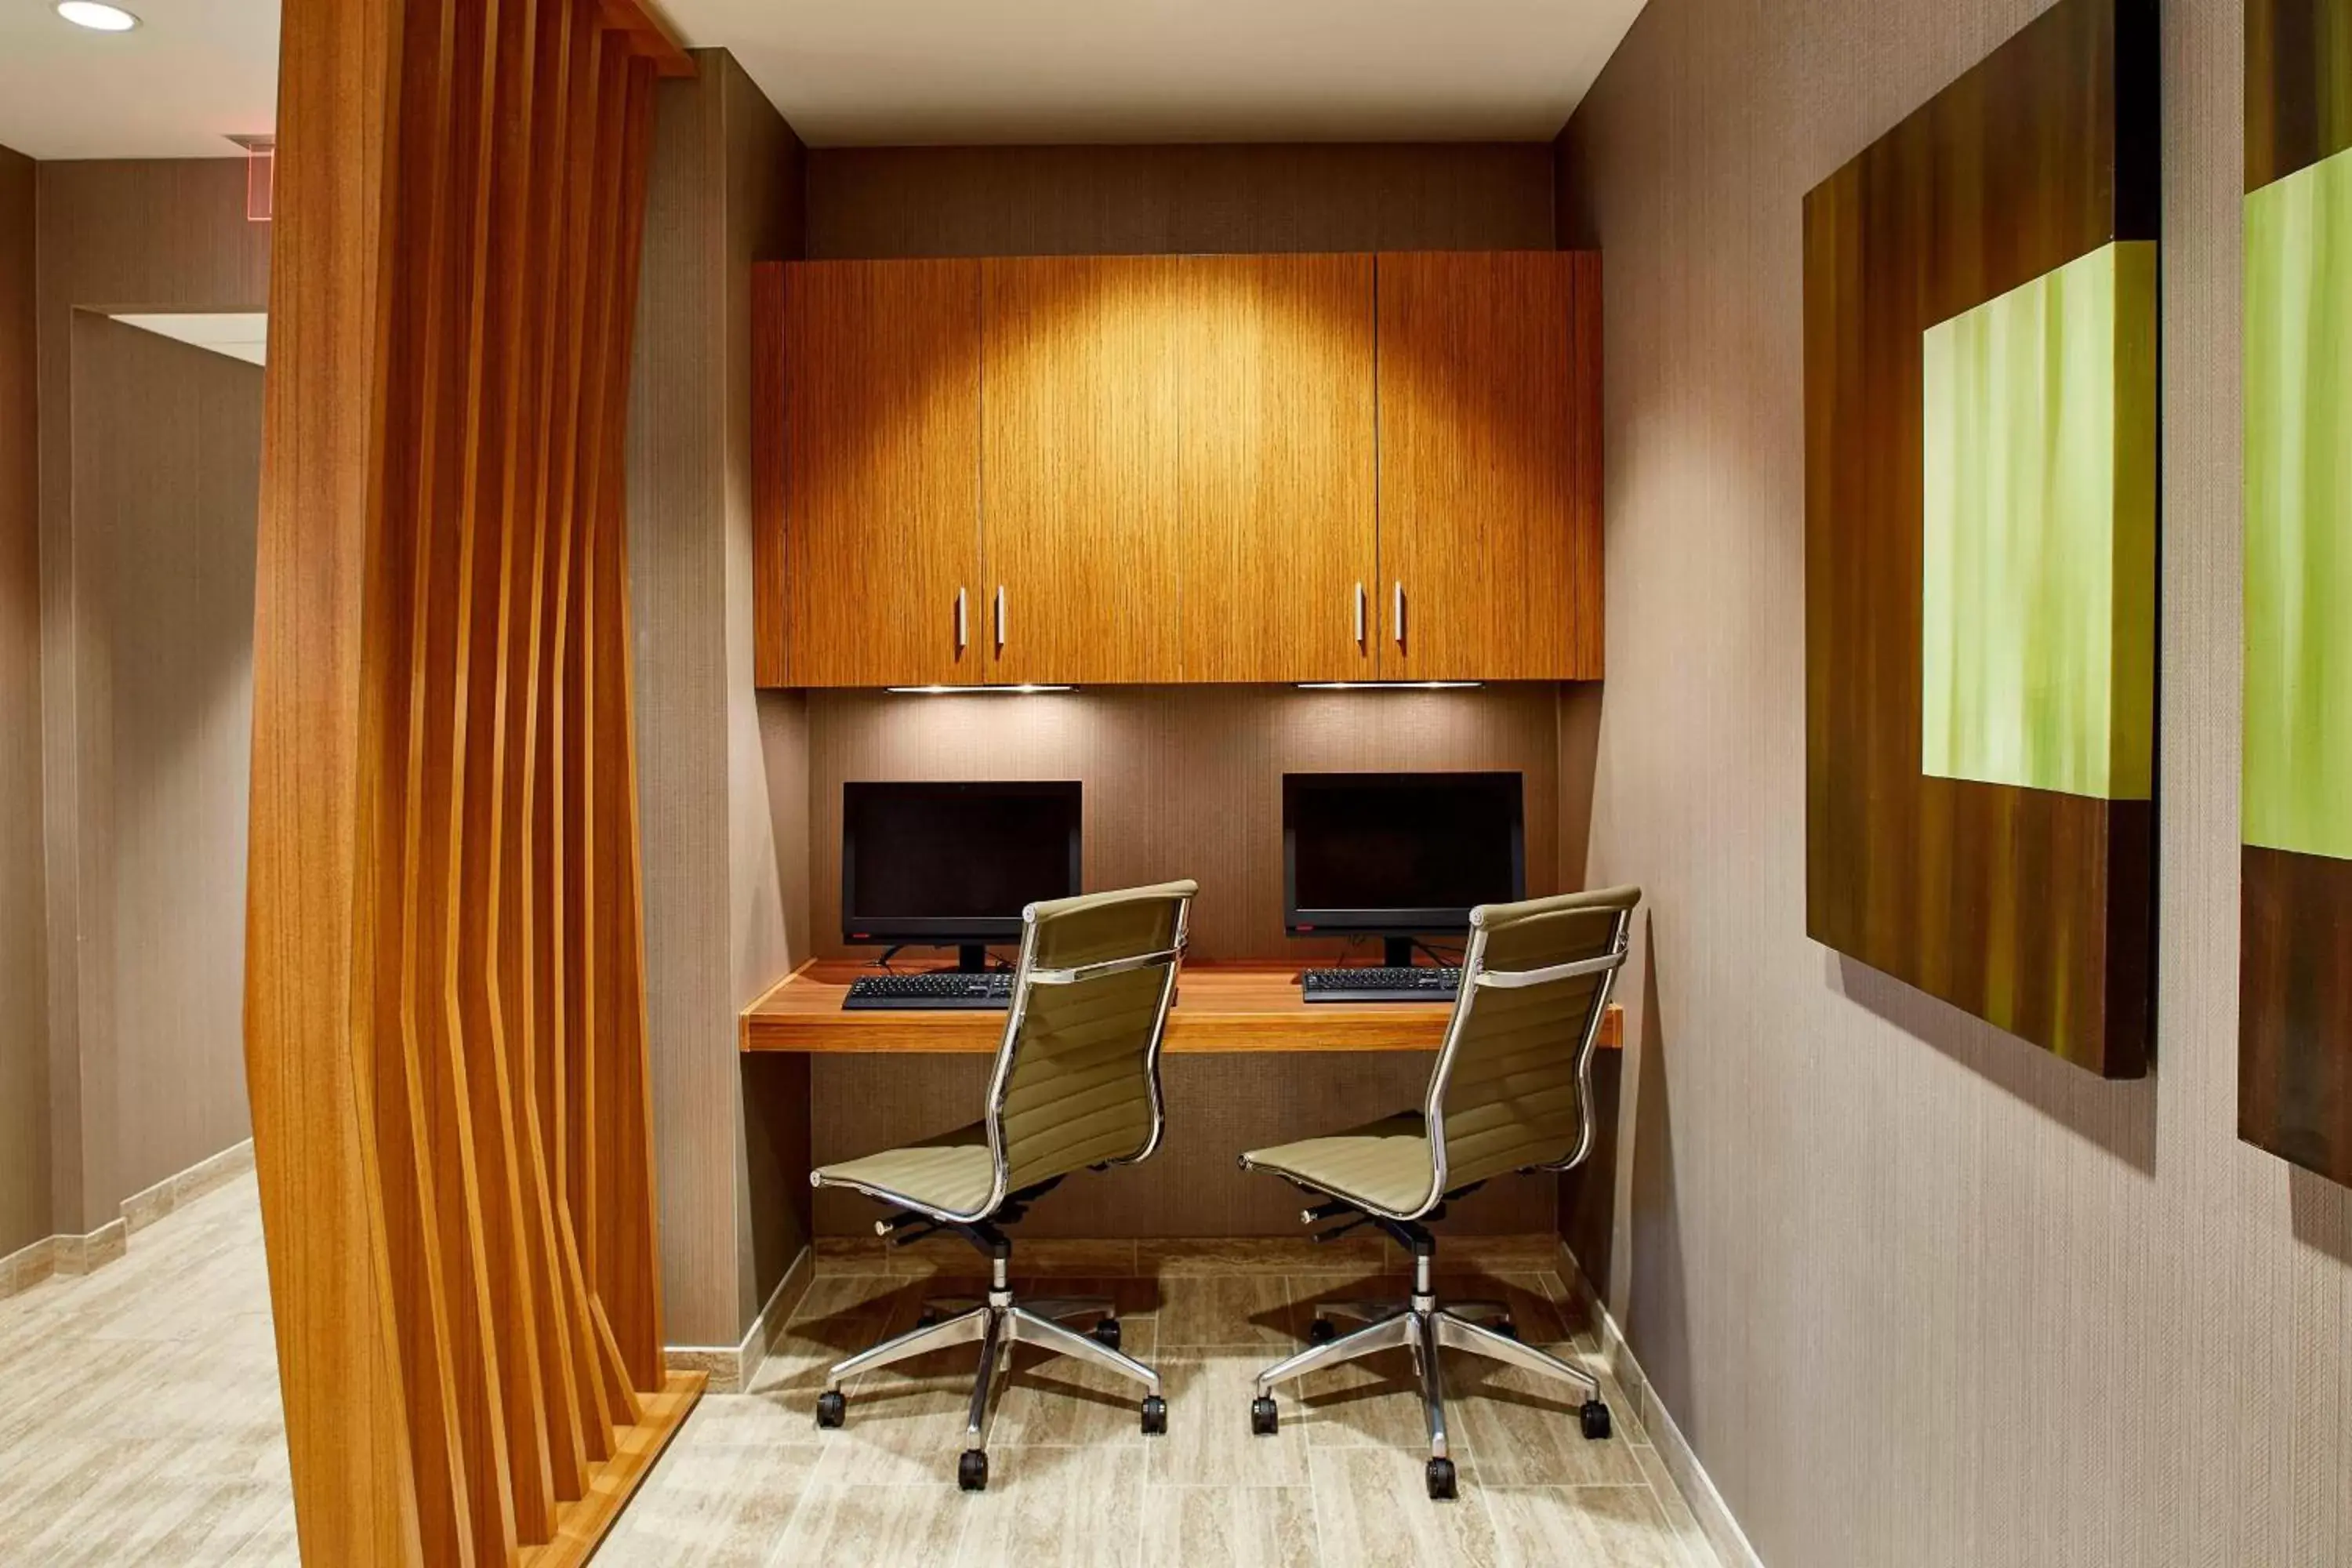 Business facilities in SpringHill Suites by Marriott Dayton Beavercreek